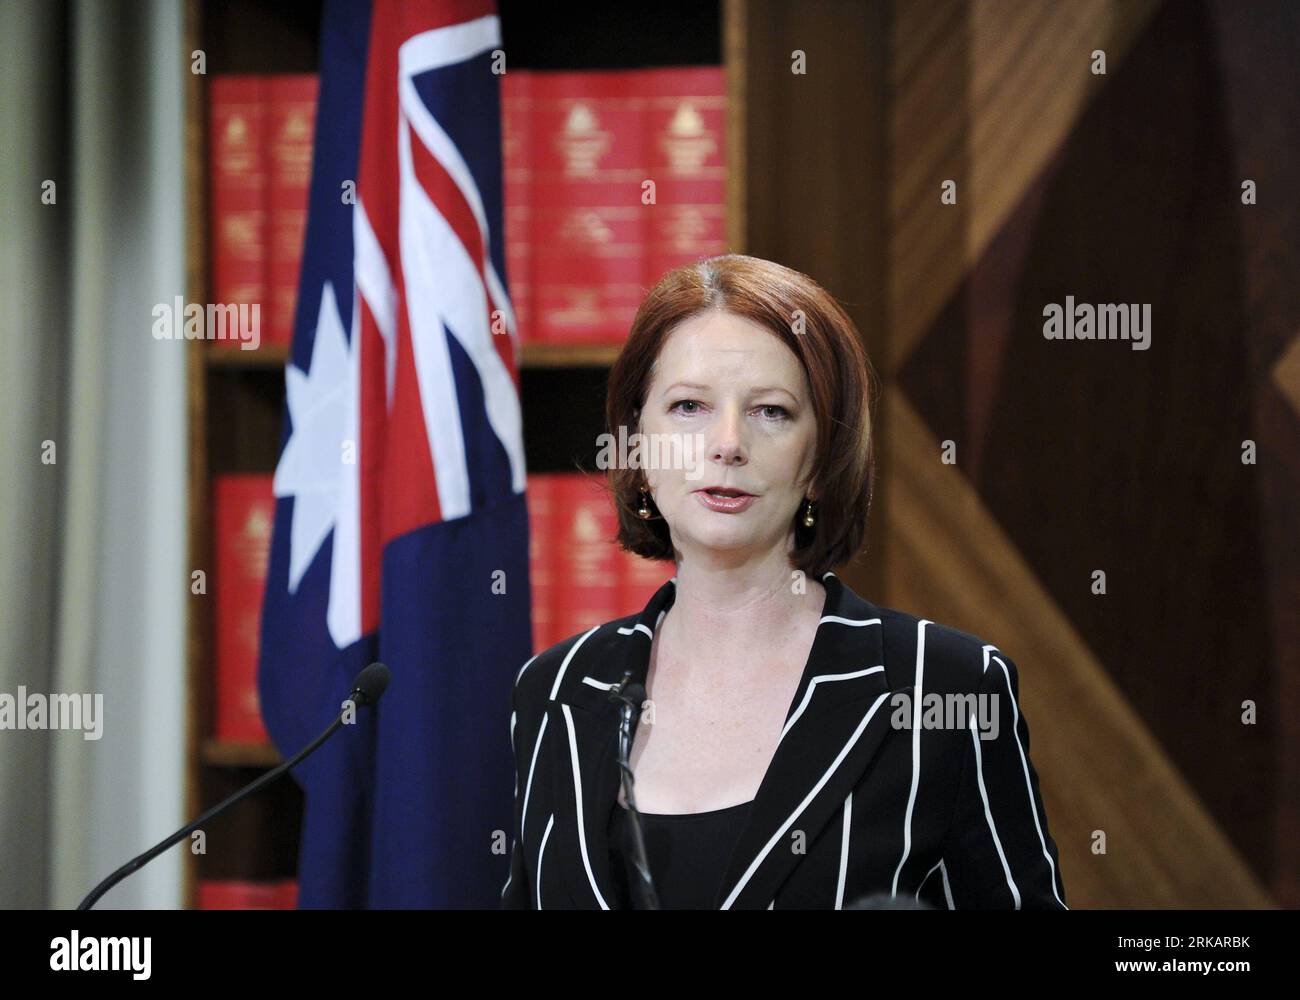 Bildnummer: 54418597  Datum: 11.09.2010  Copyright: imago/Xinhua (100911) -- MELBOURNE, Sep. 11, 2010 (Xinhua) -- Australian Prime Minister Julia Gillard announces her new cabinet for the Labor Government in next term in the Commonwealth Office in Melbourne, Australia, Sep 11, 2010. Gillard confirmed that former Prime Minister Kevin Rudd would be given the Foreign Affairs portfolio. (Xinhua/Bai Xue) (yc) AUSTRALIA-PRIME MINISTER-NEW CABINET PUBLICATIONxNOTxINxCHN People Politik kbdig xmk 2010 quer     Bildnummer 54418597 Date 11 09 2010 Copyright Imago XINHUA  Melbourne Sep 11 2010 XINHUA Aust Stock Photo